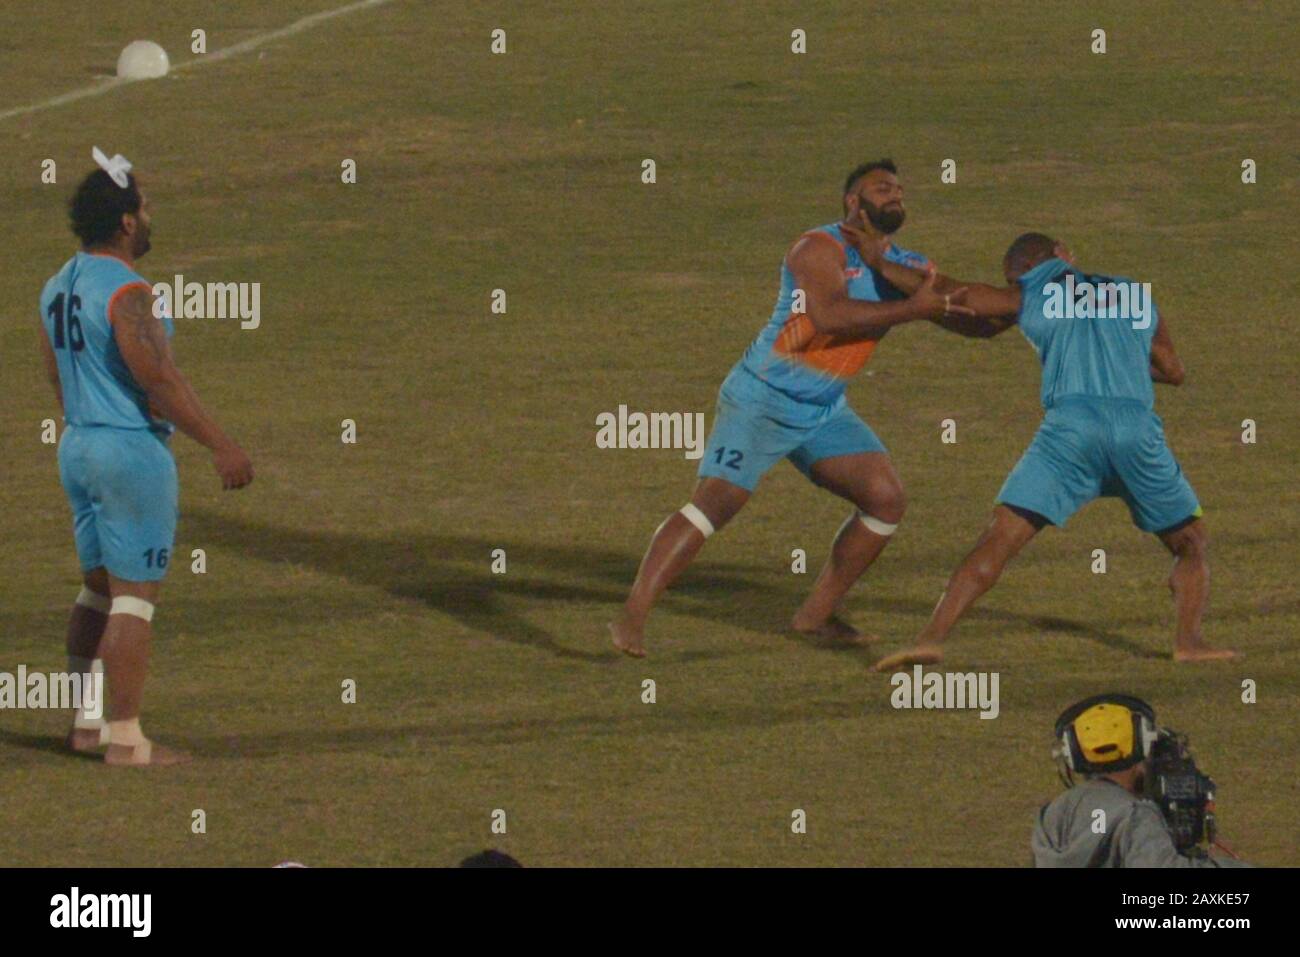 Kabaddi players seem in action during the match playing between India vs Sierra Leone, as Indian Kabaddi team win by 18-45 during Kabaddi World Cup 2020 at Punjab Stadium Lahore. Kabaddi World Cup 2020 begins in Pakistan. All is set for the 'Kabaddi World Cup 2020' being hosted in three cities Lahore, Faisalabad and Gujrat from February 09 to 16 February. respectively. The event is jointly organized by Punjab government, Sports Board Punjab (SBP) and Pakistan Kabaddi Federation (PKF). (Photo by Rana Sajid Hussain/Pacific Press) Stock Photo